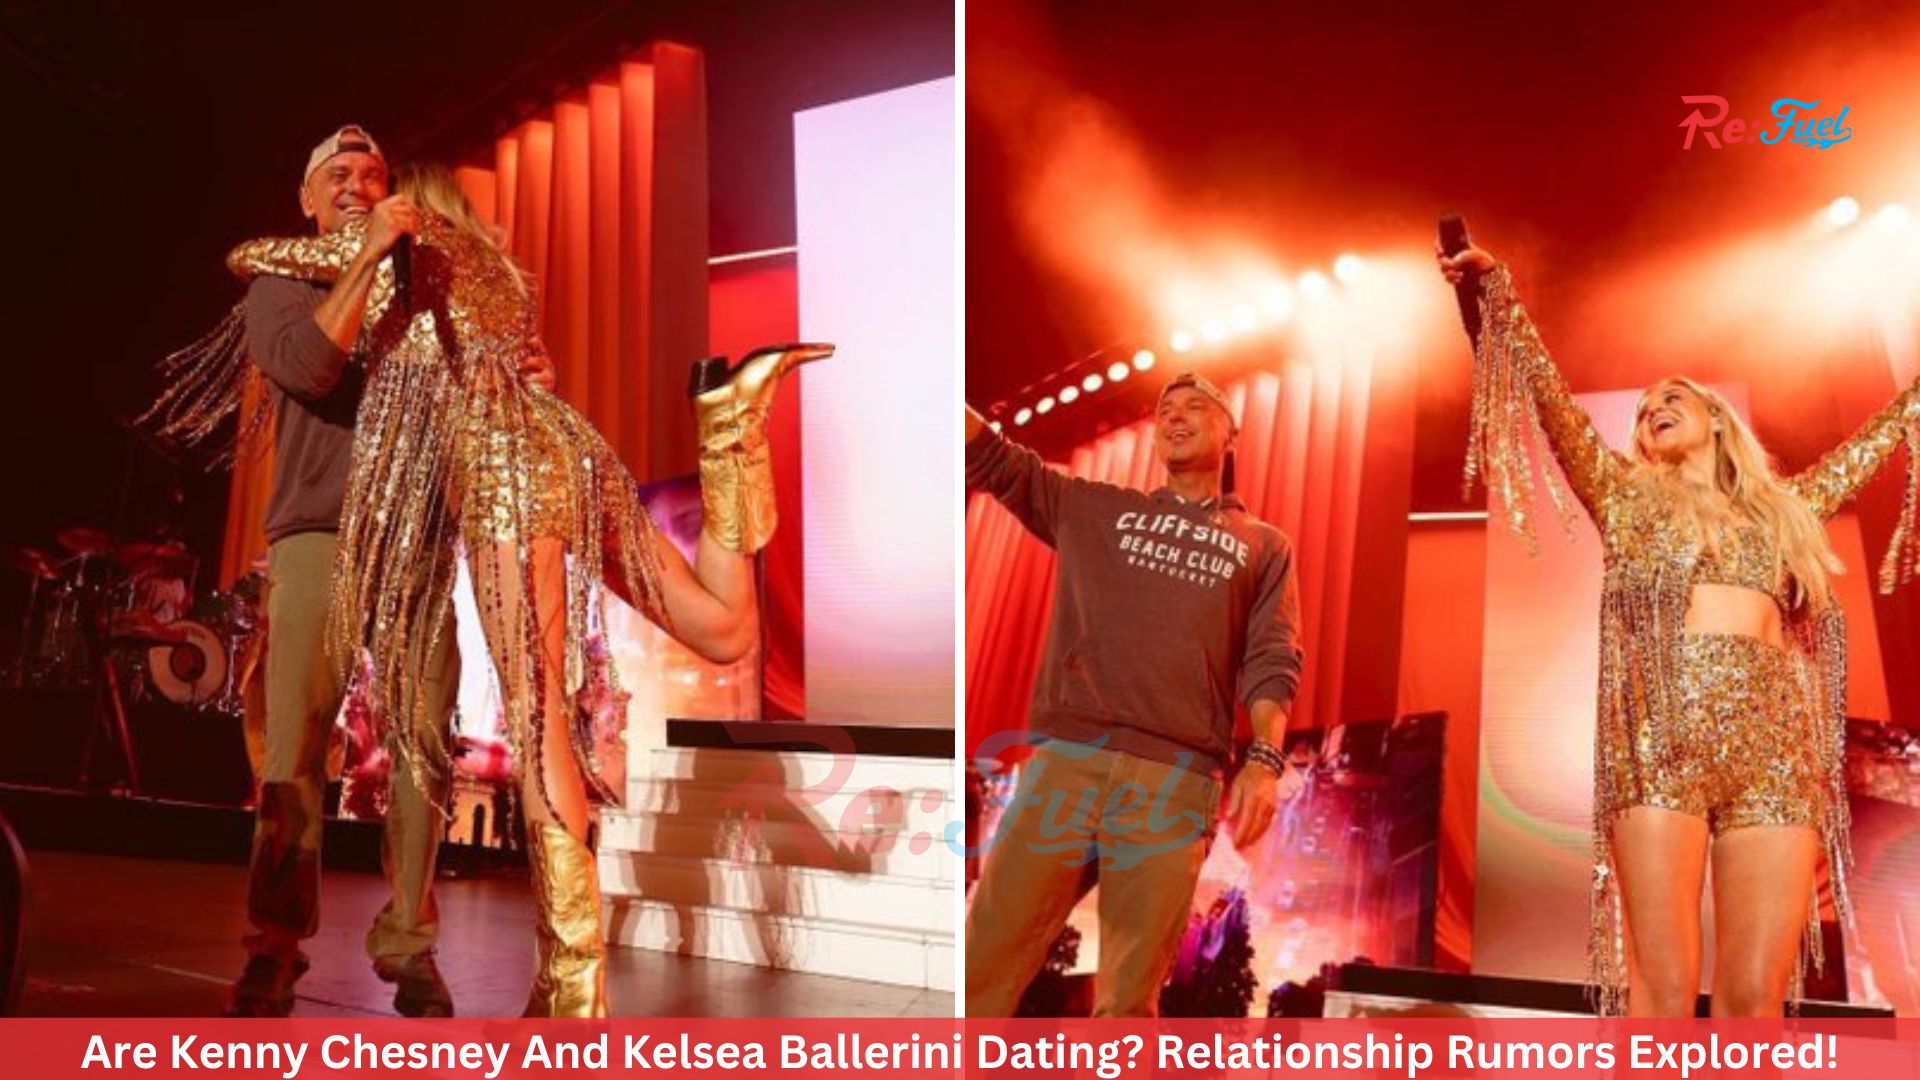 Are Kenny Chesney And Kelsea Ballerini Dating? Relationship Rumors Explored!